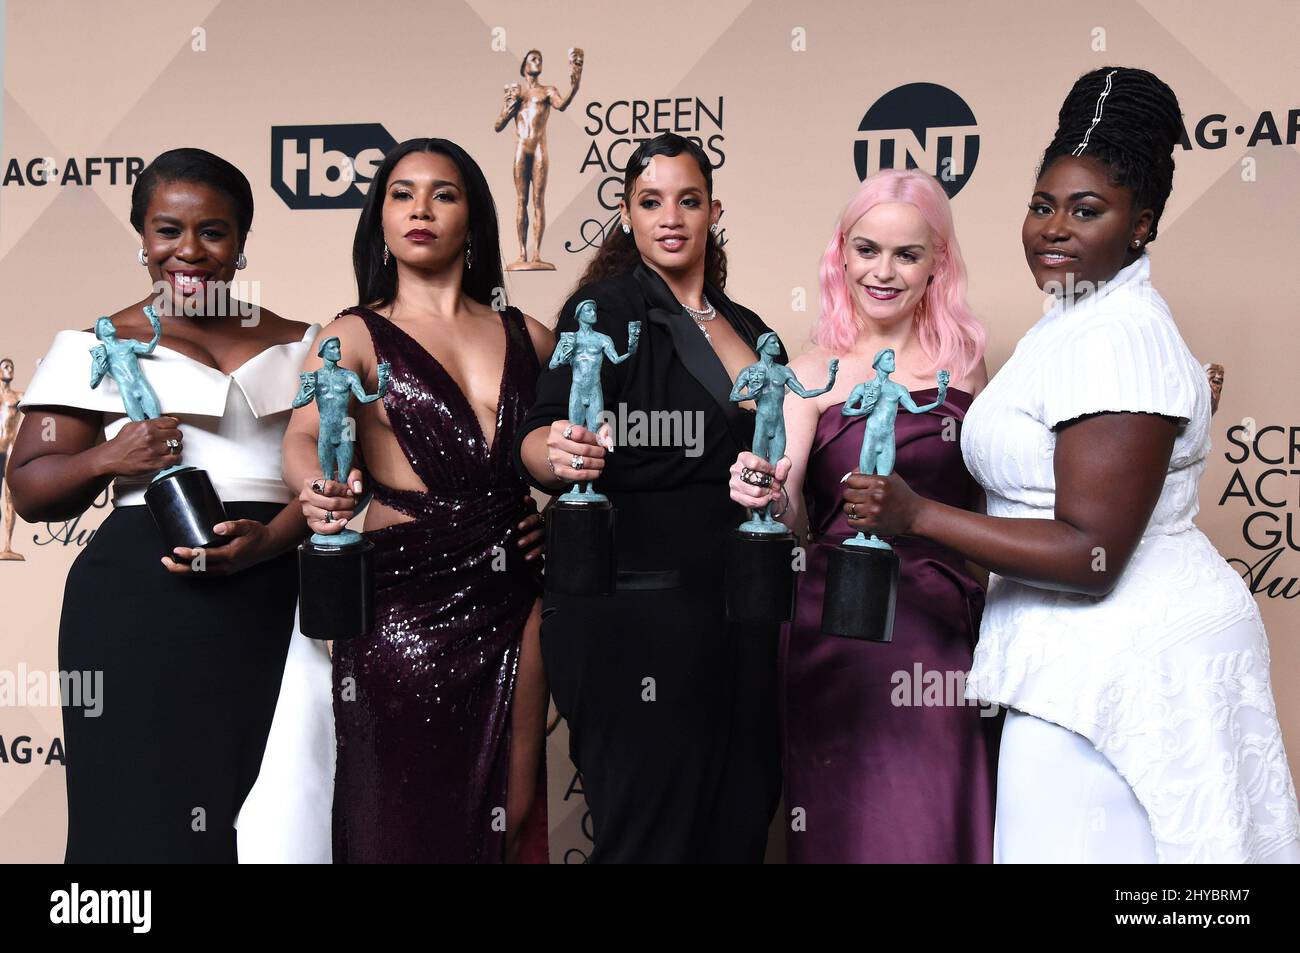 Uzo Aduba, Selenis Leyva, Dascha Polanco, Taryn Manning and Danielle Brooks attending the press room of the 23rd Annual Screen Actors Guild Awards held at the Shrine Auditorium in Los Angeles, California Stock Photo